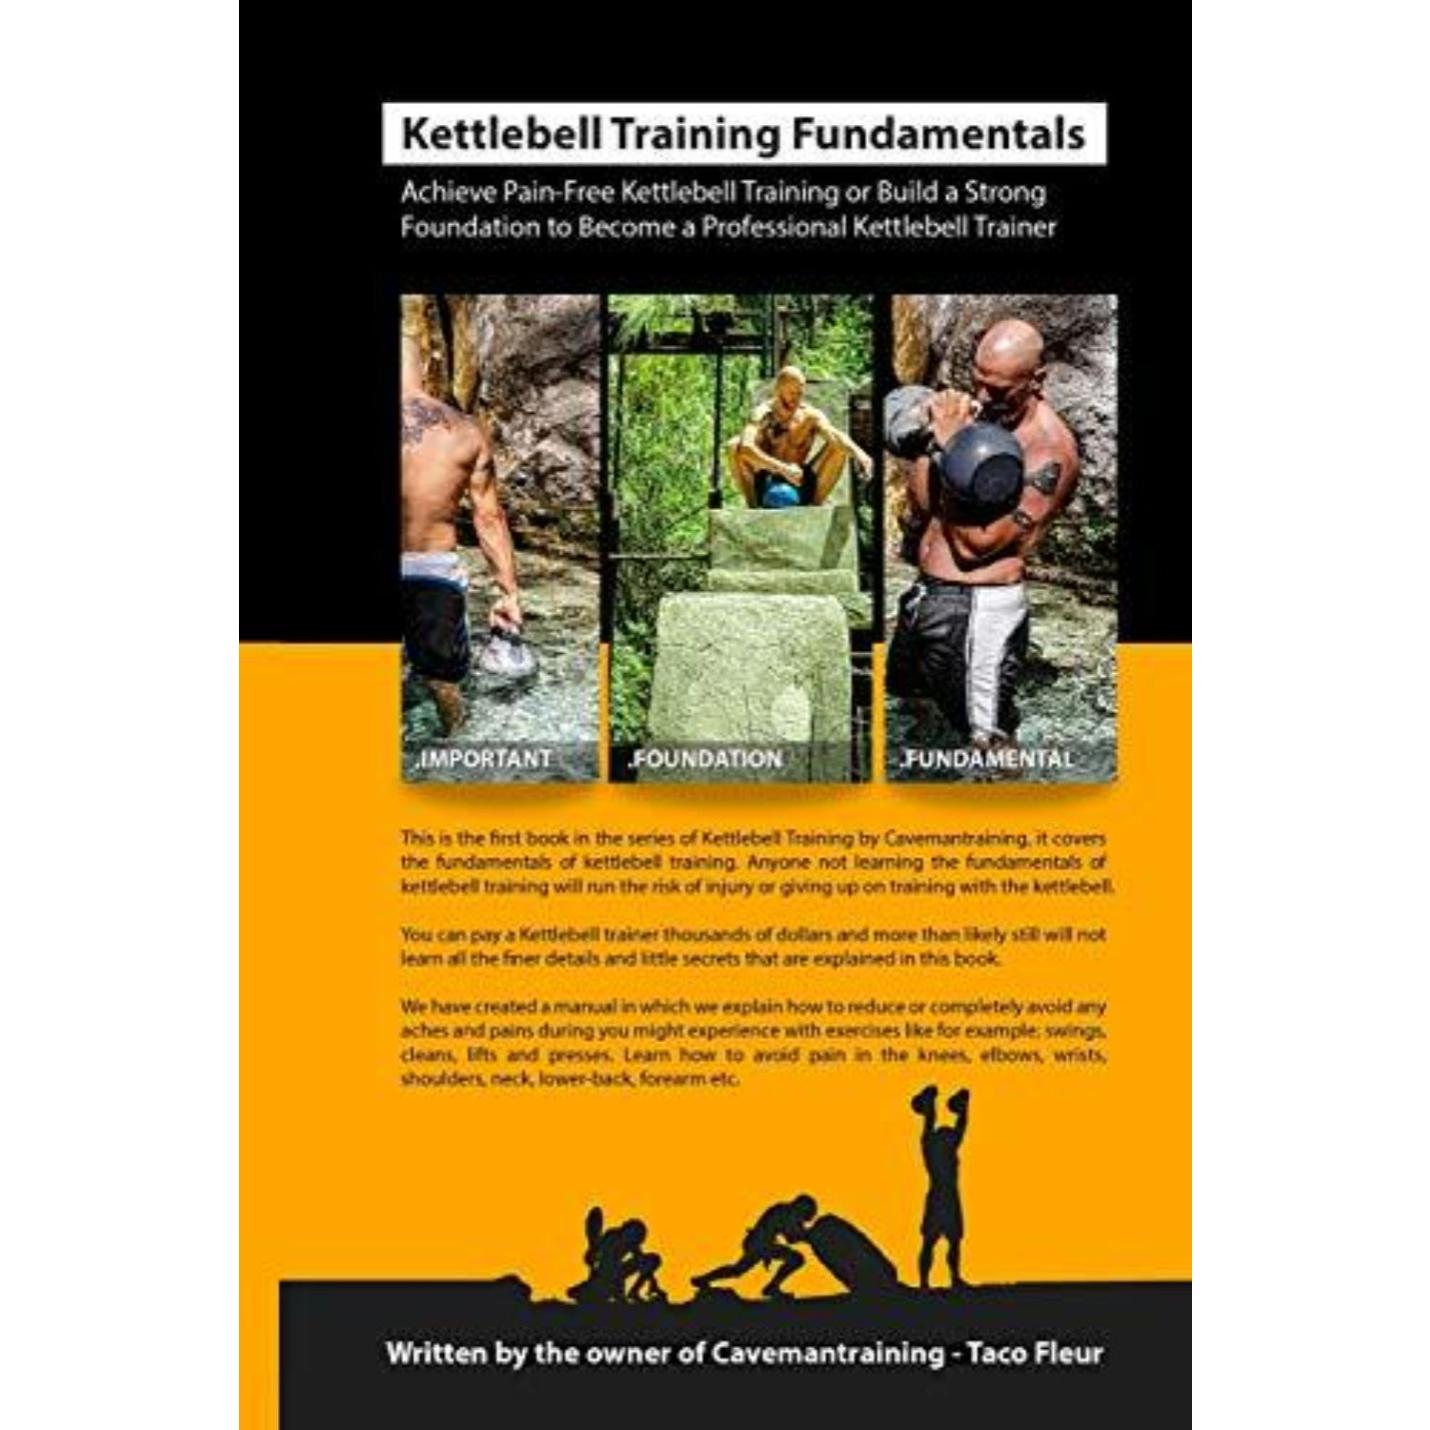 Kettlebell Training Fundamentals: Achieve Pain-Free Kettlebell Training and Build a Strong Foundation to Become a Professional Kettlebell Trainer or ... Kettlebell Trainer or Enthusiast - kettlebell oefeningen - happygetfit.com